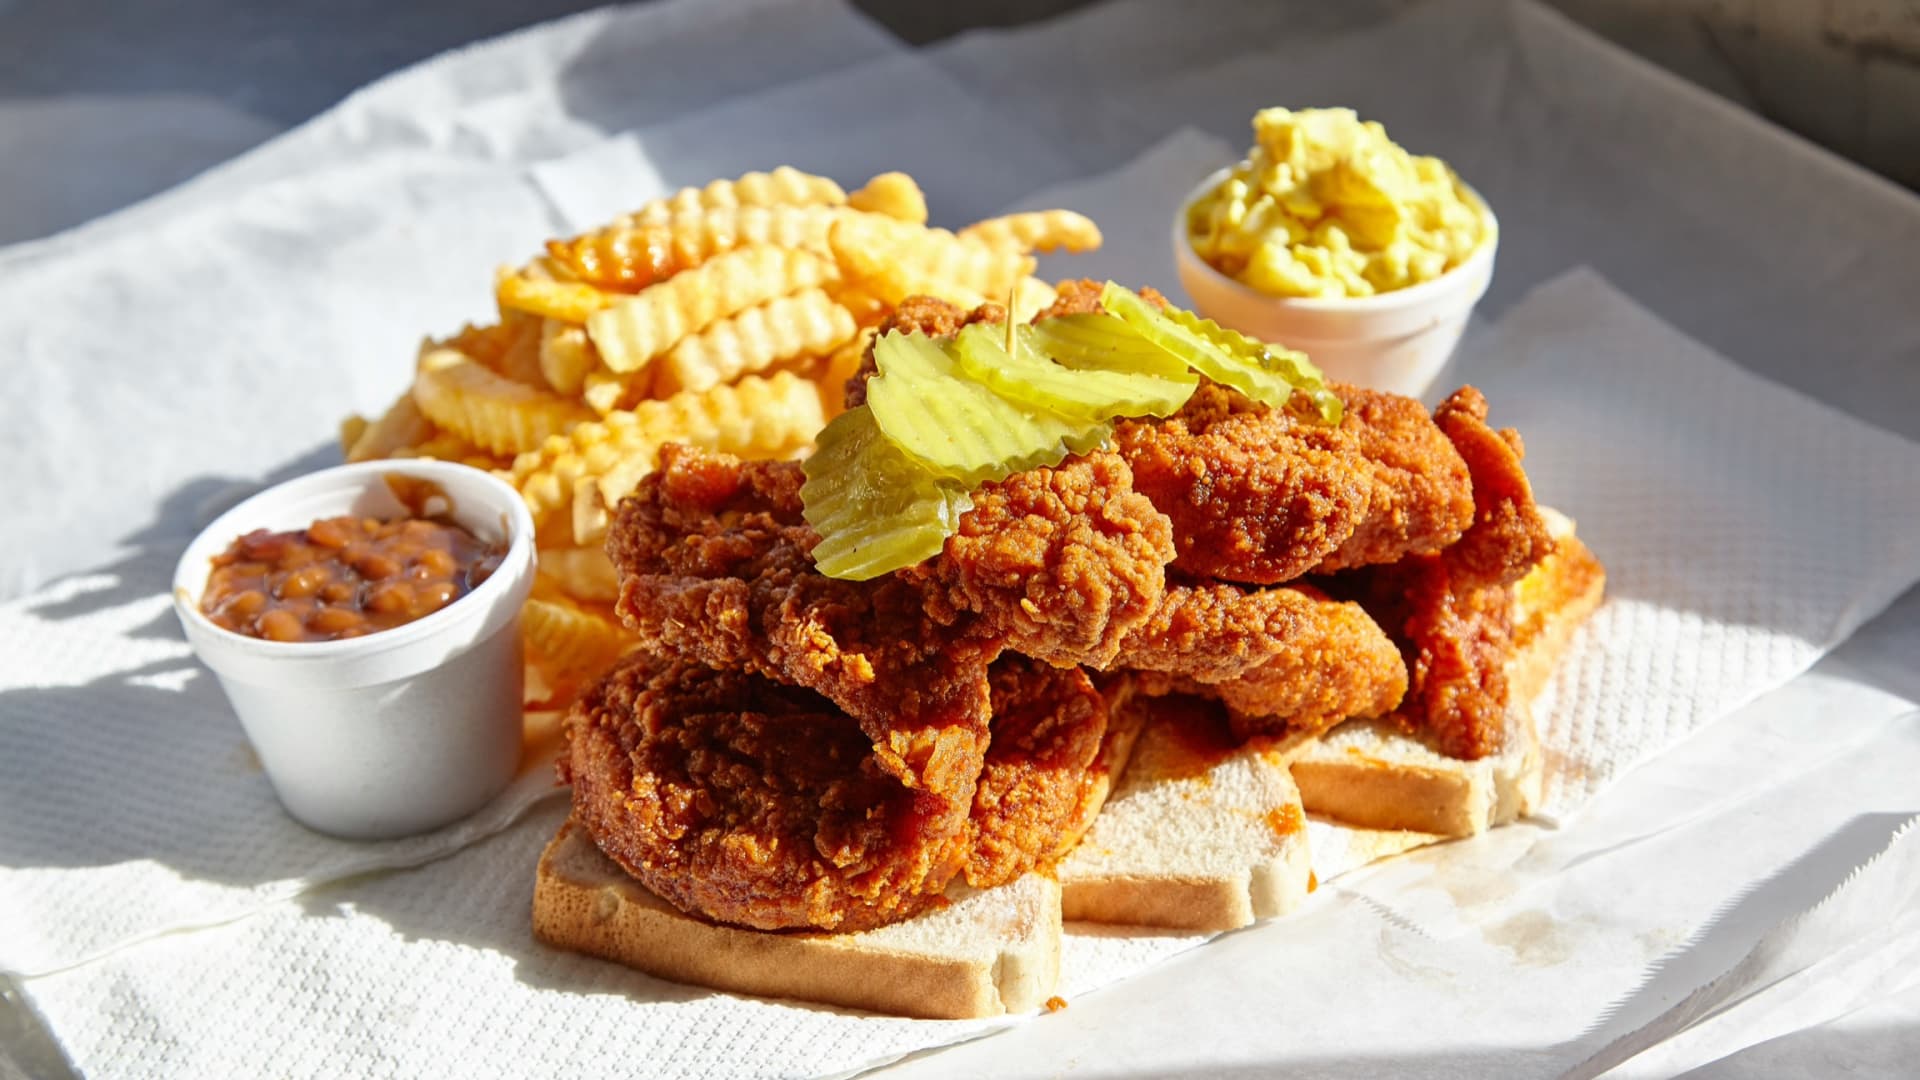 nashville-hot-chicken-is-everywhere,-but-it’s-still-at-the-heart-of-its-hometown’s-culture